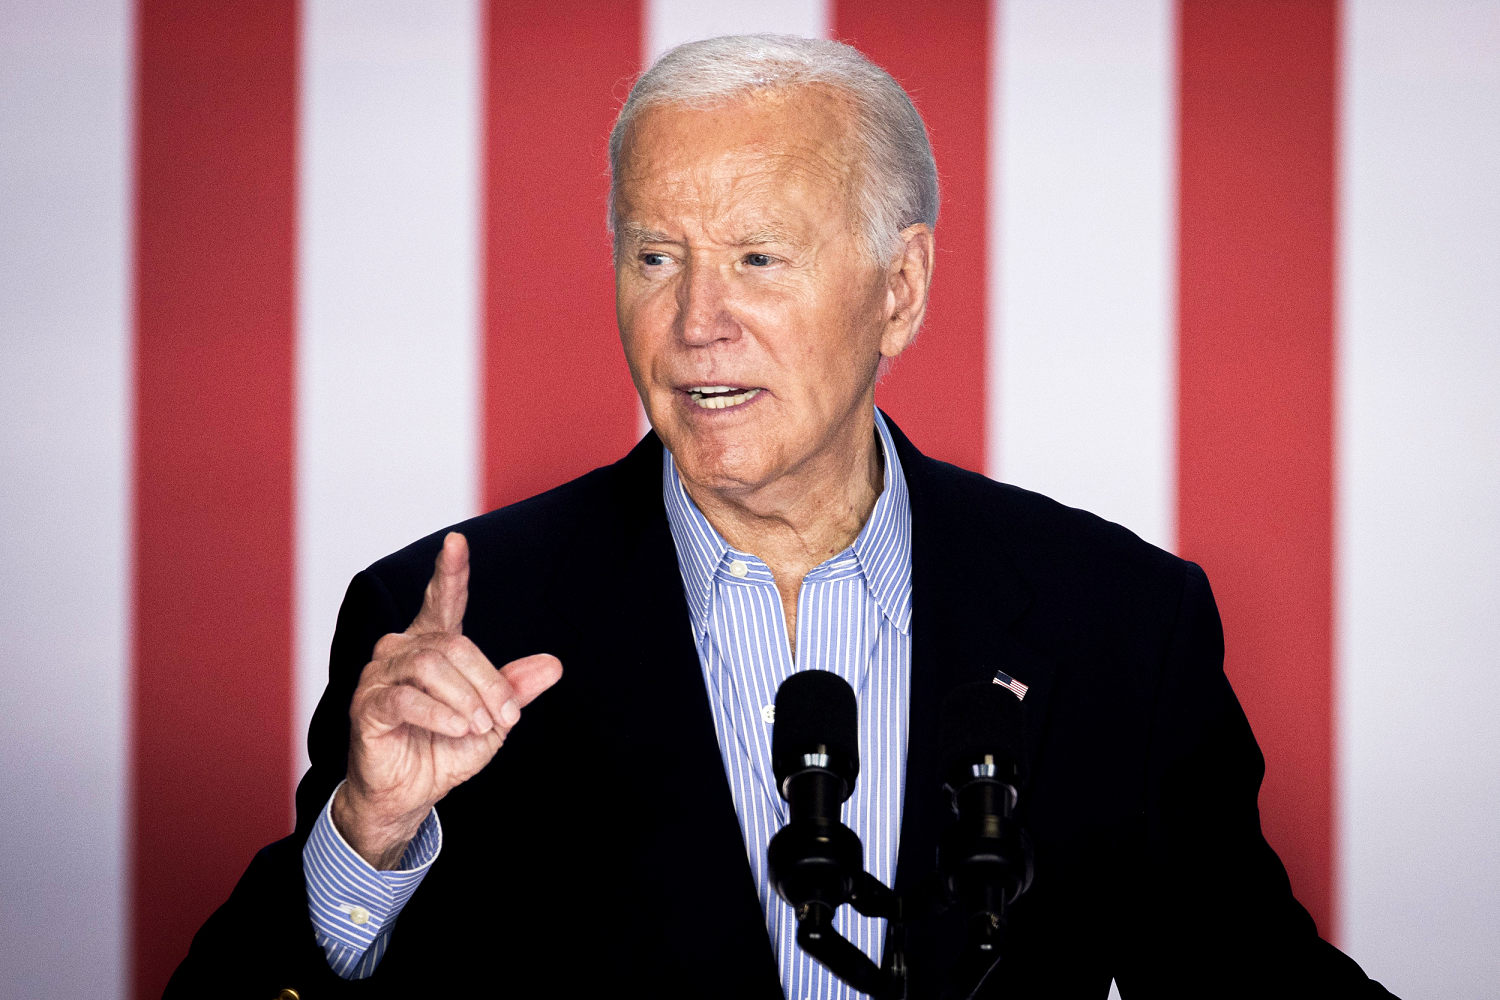 'We’re doomed': Democrats lawmakers worry Biden’s interview won’t save his campaign